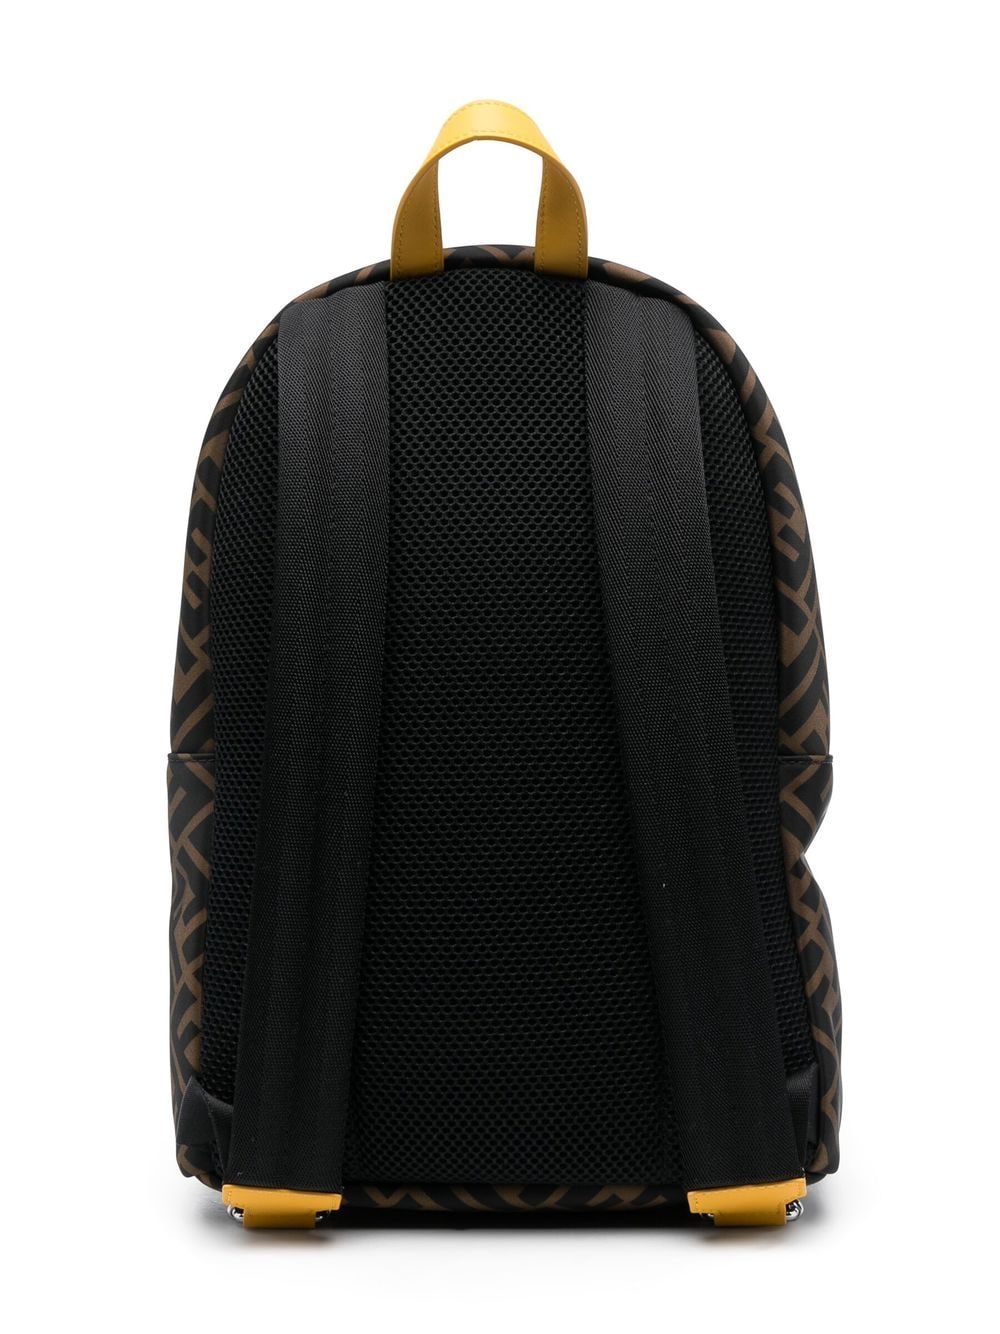 Brown and black backpack for children with logo